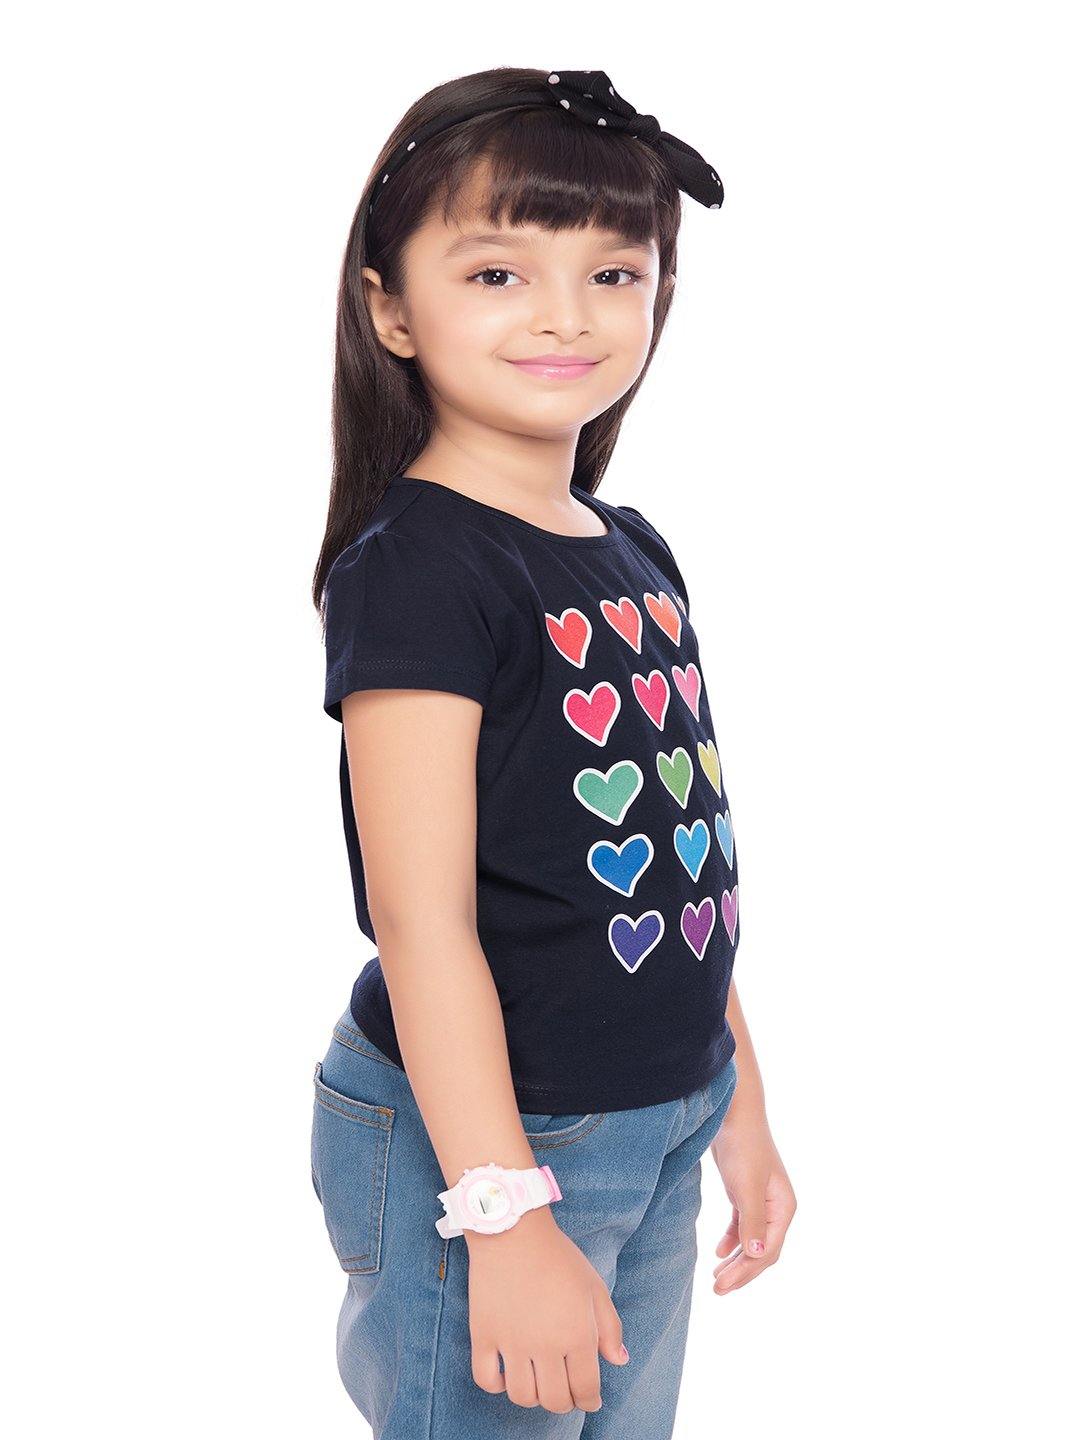 Tiny Baby Navy Blue Colored Top - T-107 Navy Blue - TINY BABY INDIA shop.tinybaby.in